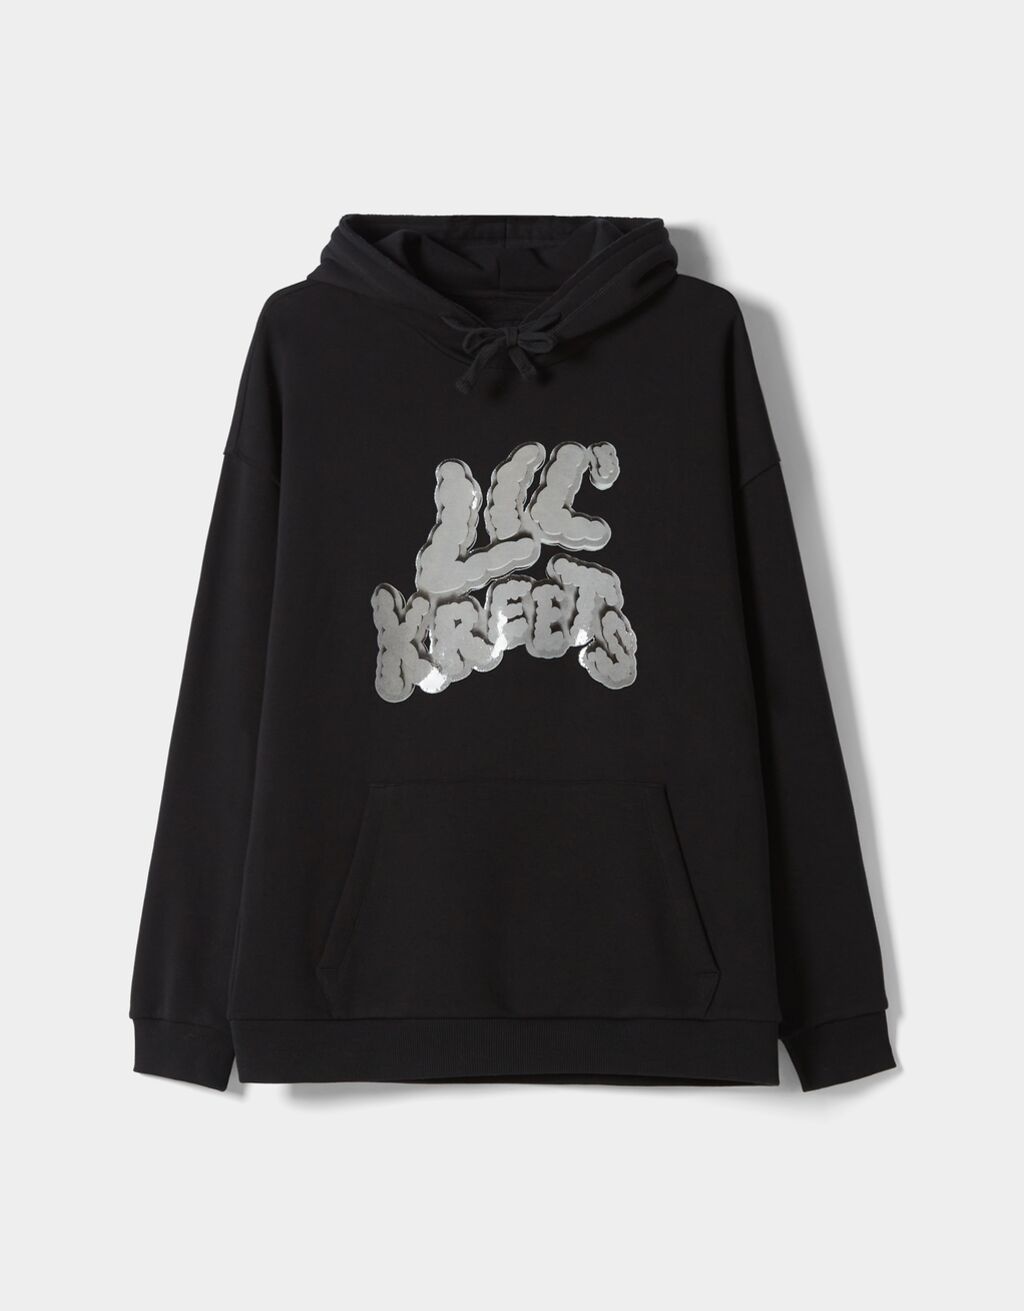 Oversize hoodie with a LIL'KREETS print